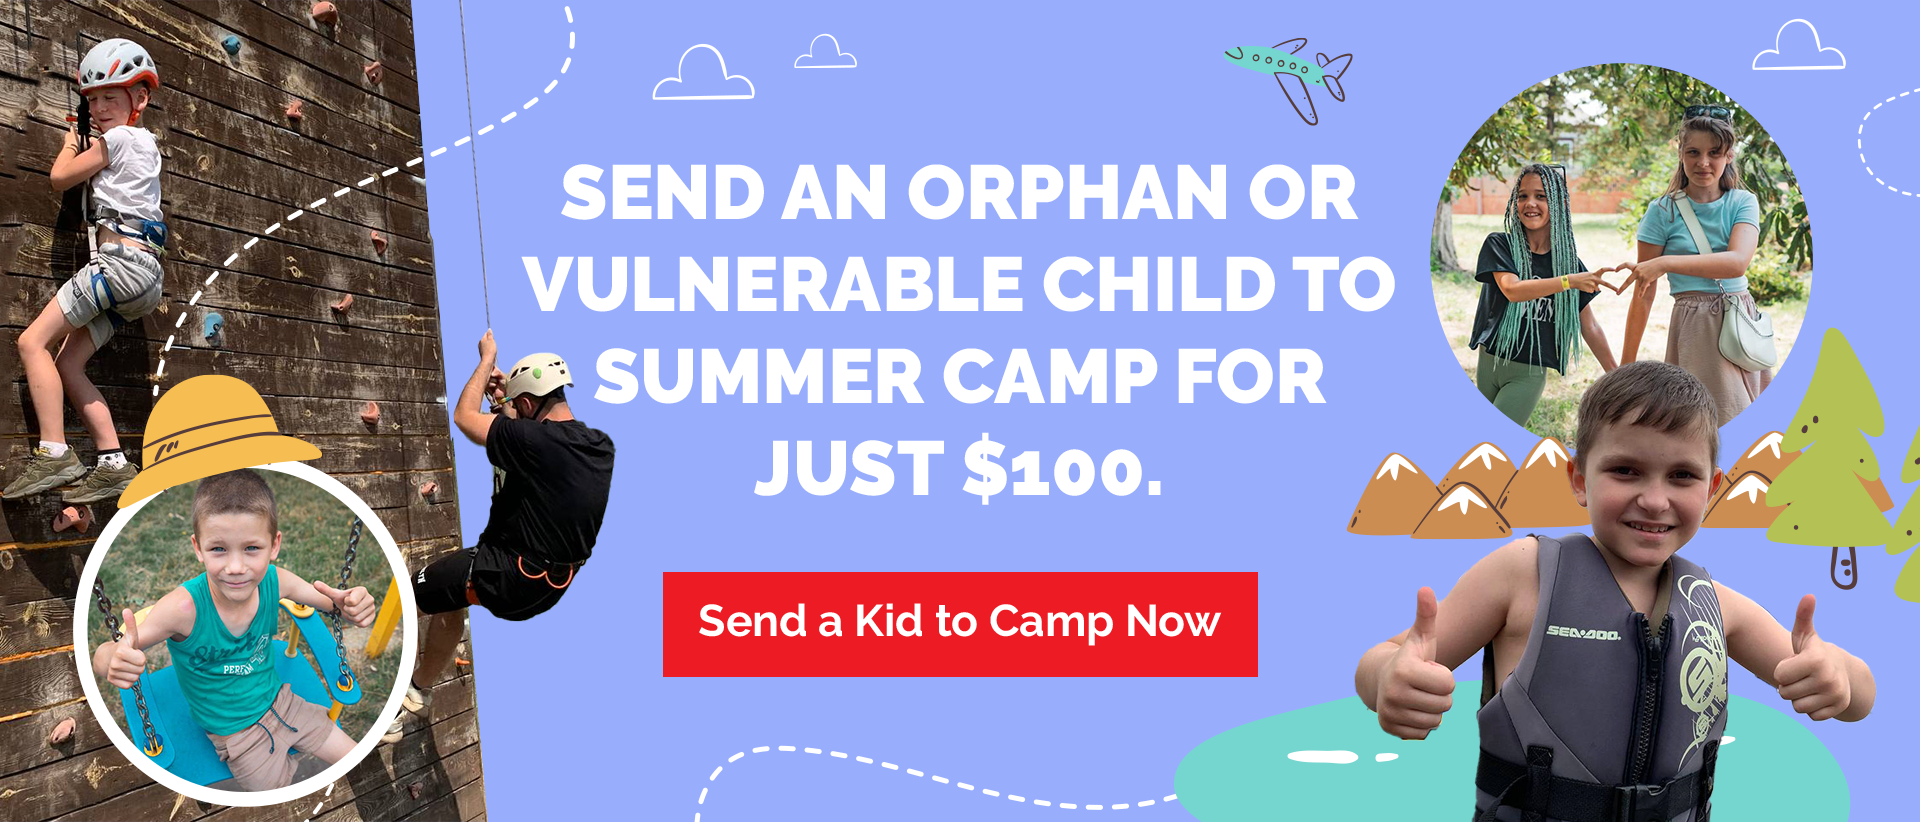 Send a child to camp